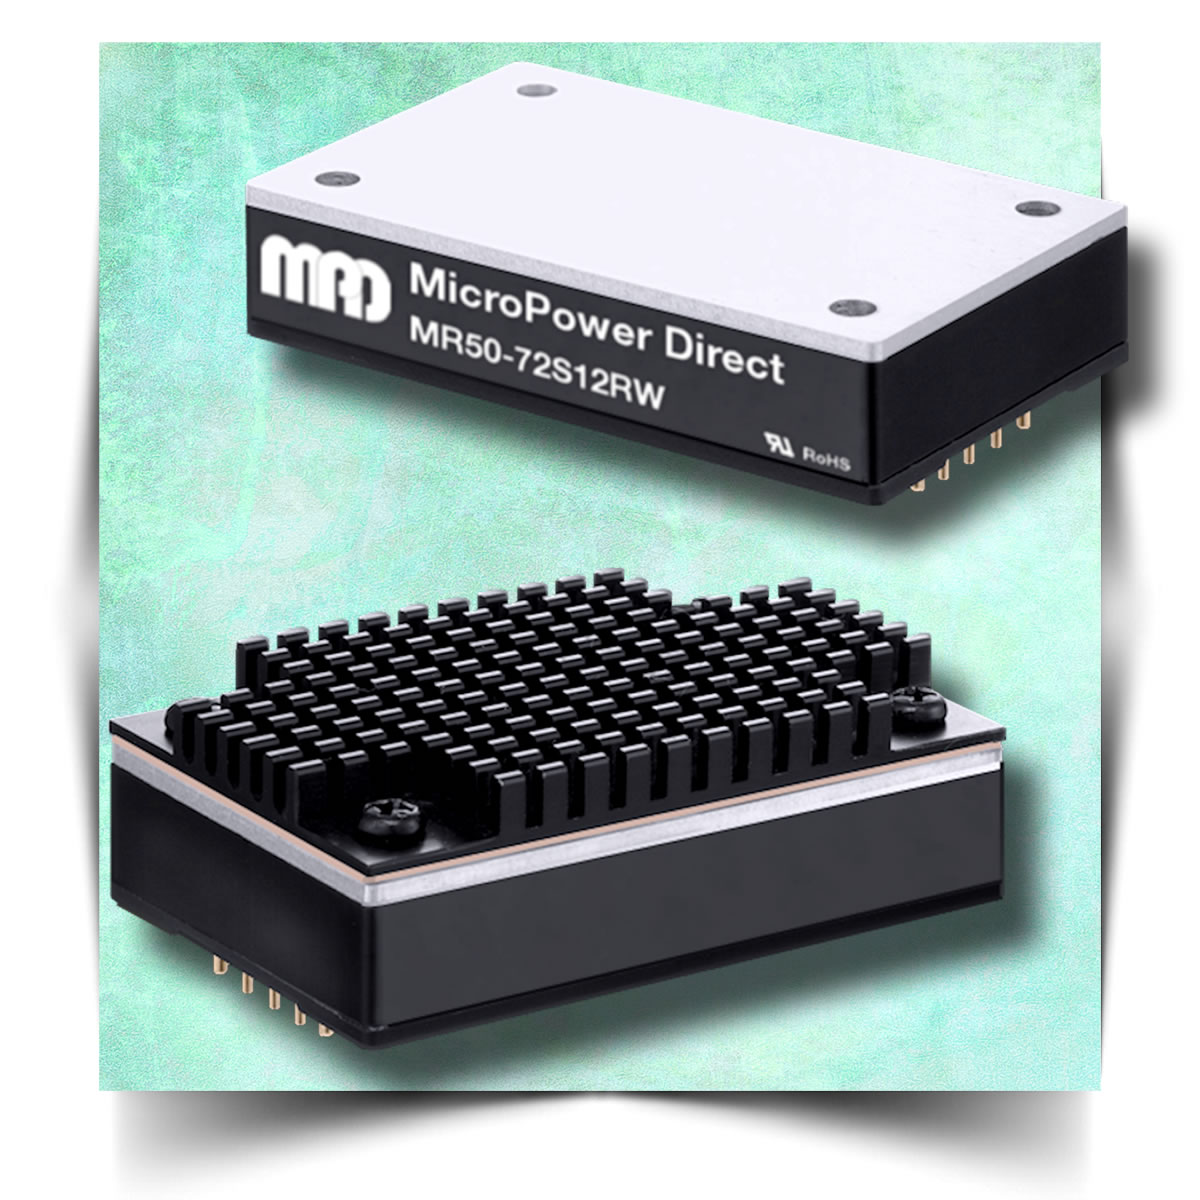 MicroPower Direct offers compact, wide-input, 50W railway DC/DC converters